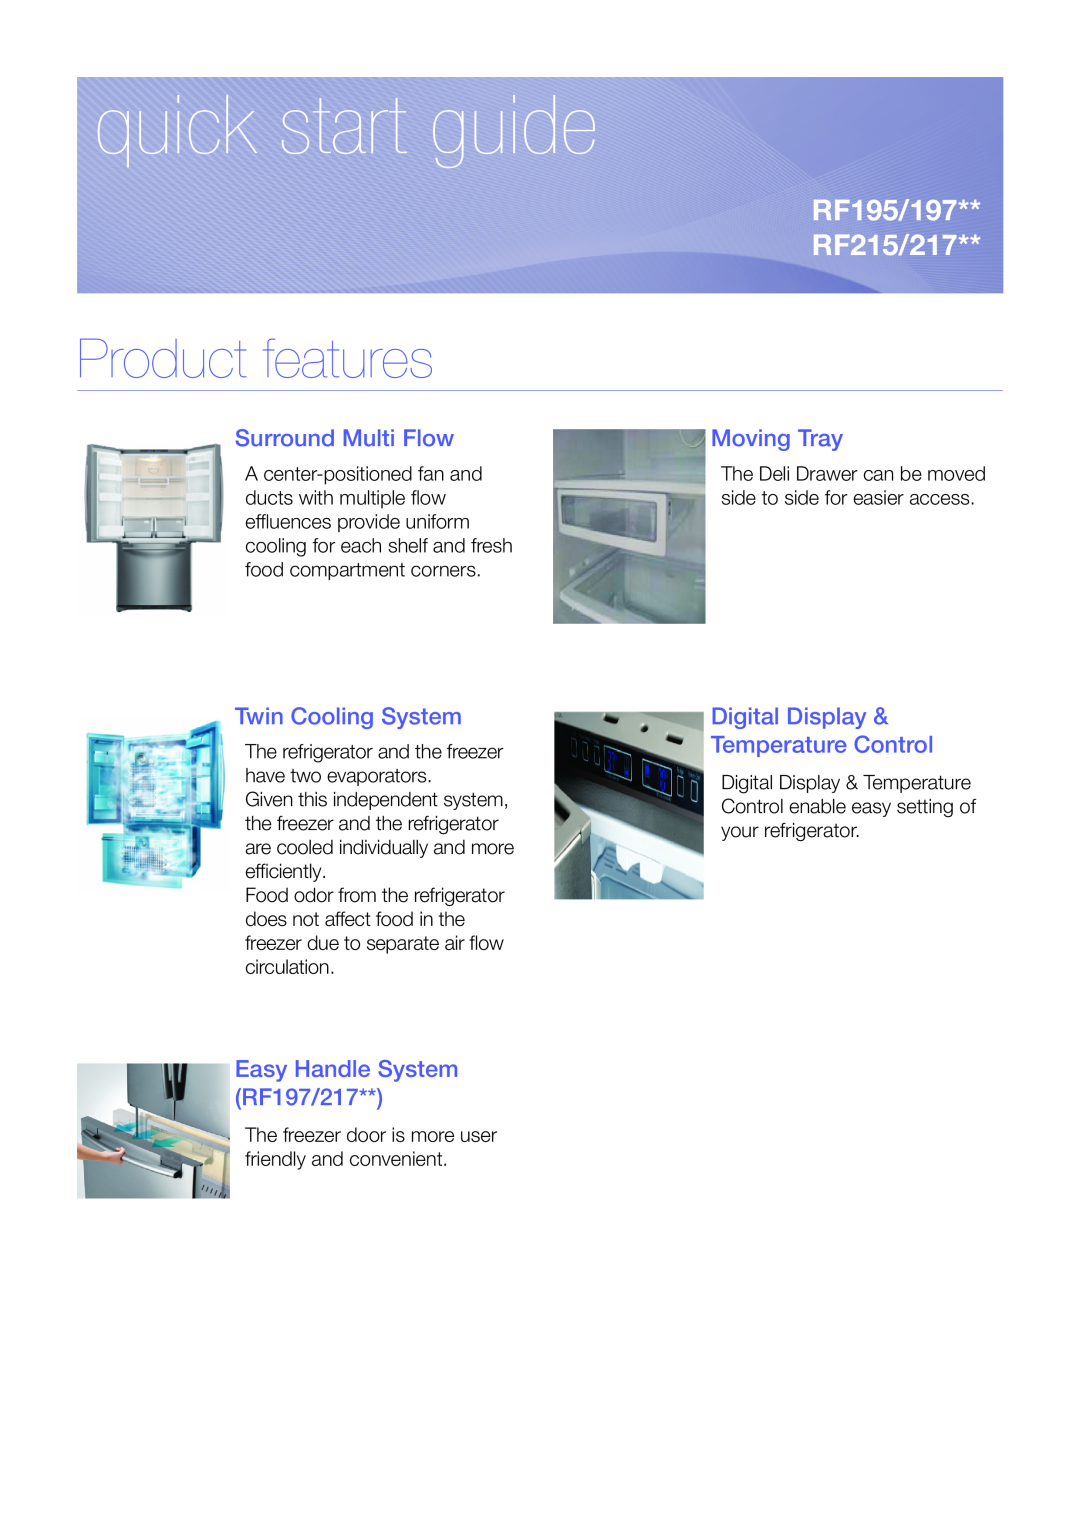 Samsung RF195 quick start Product features, Surround Multi Flow, Moving Tray, Twin Cooling System, quick start guide 